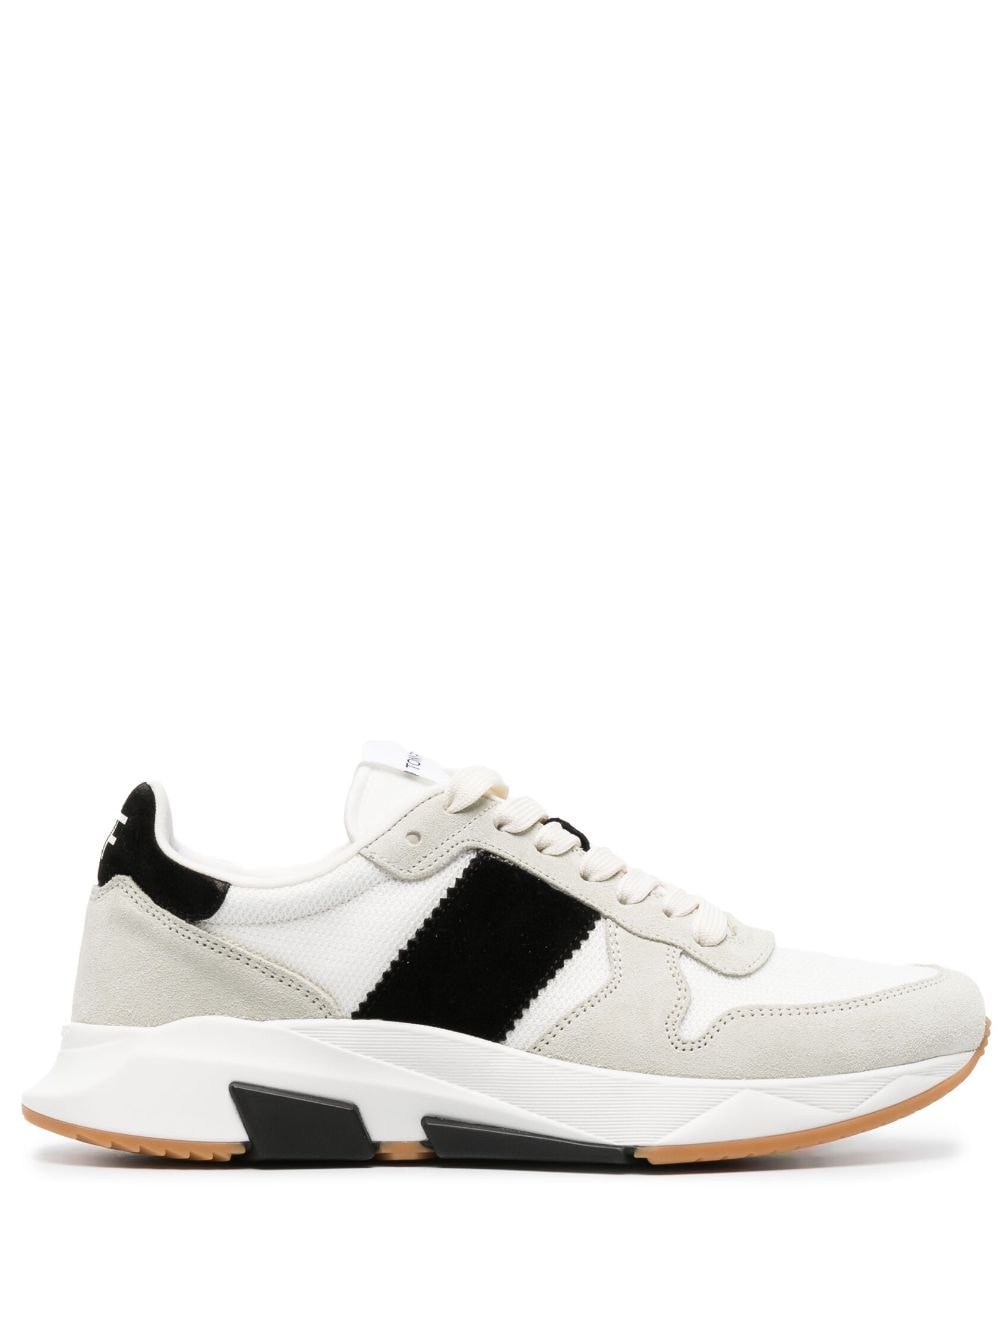 Tom Ford Suede And Technical Material Low Top Sneakers In White | ModeSens